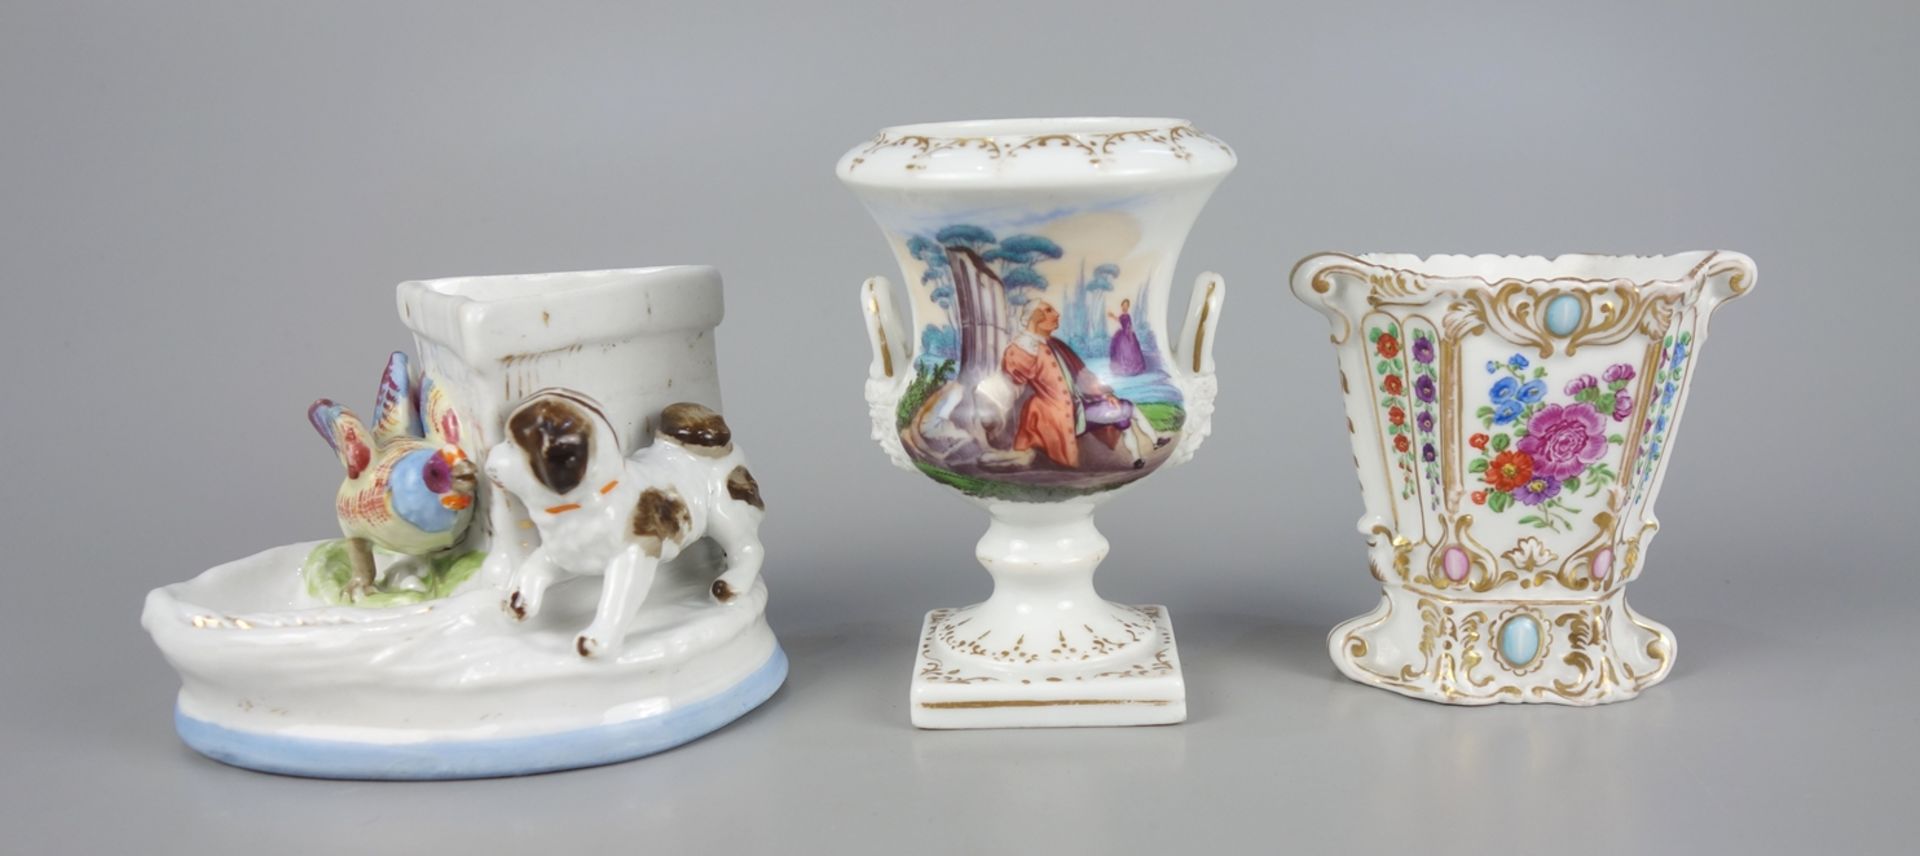 2 small vases and figural match holder, with hand painting, c.1890/1900